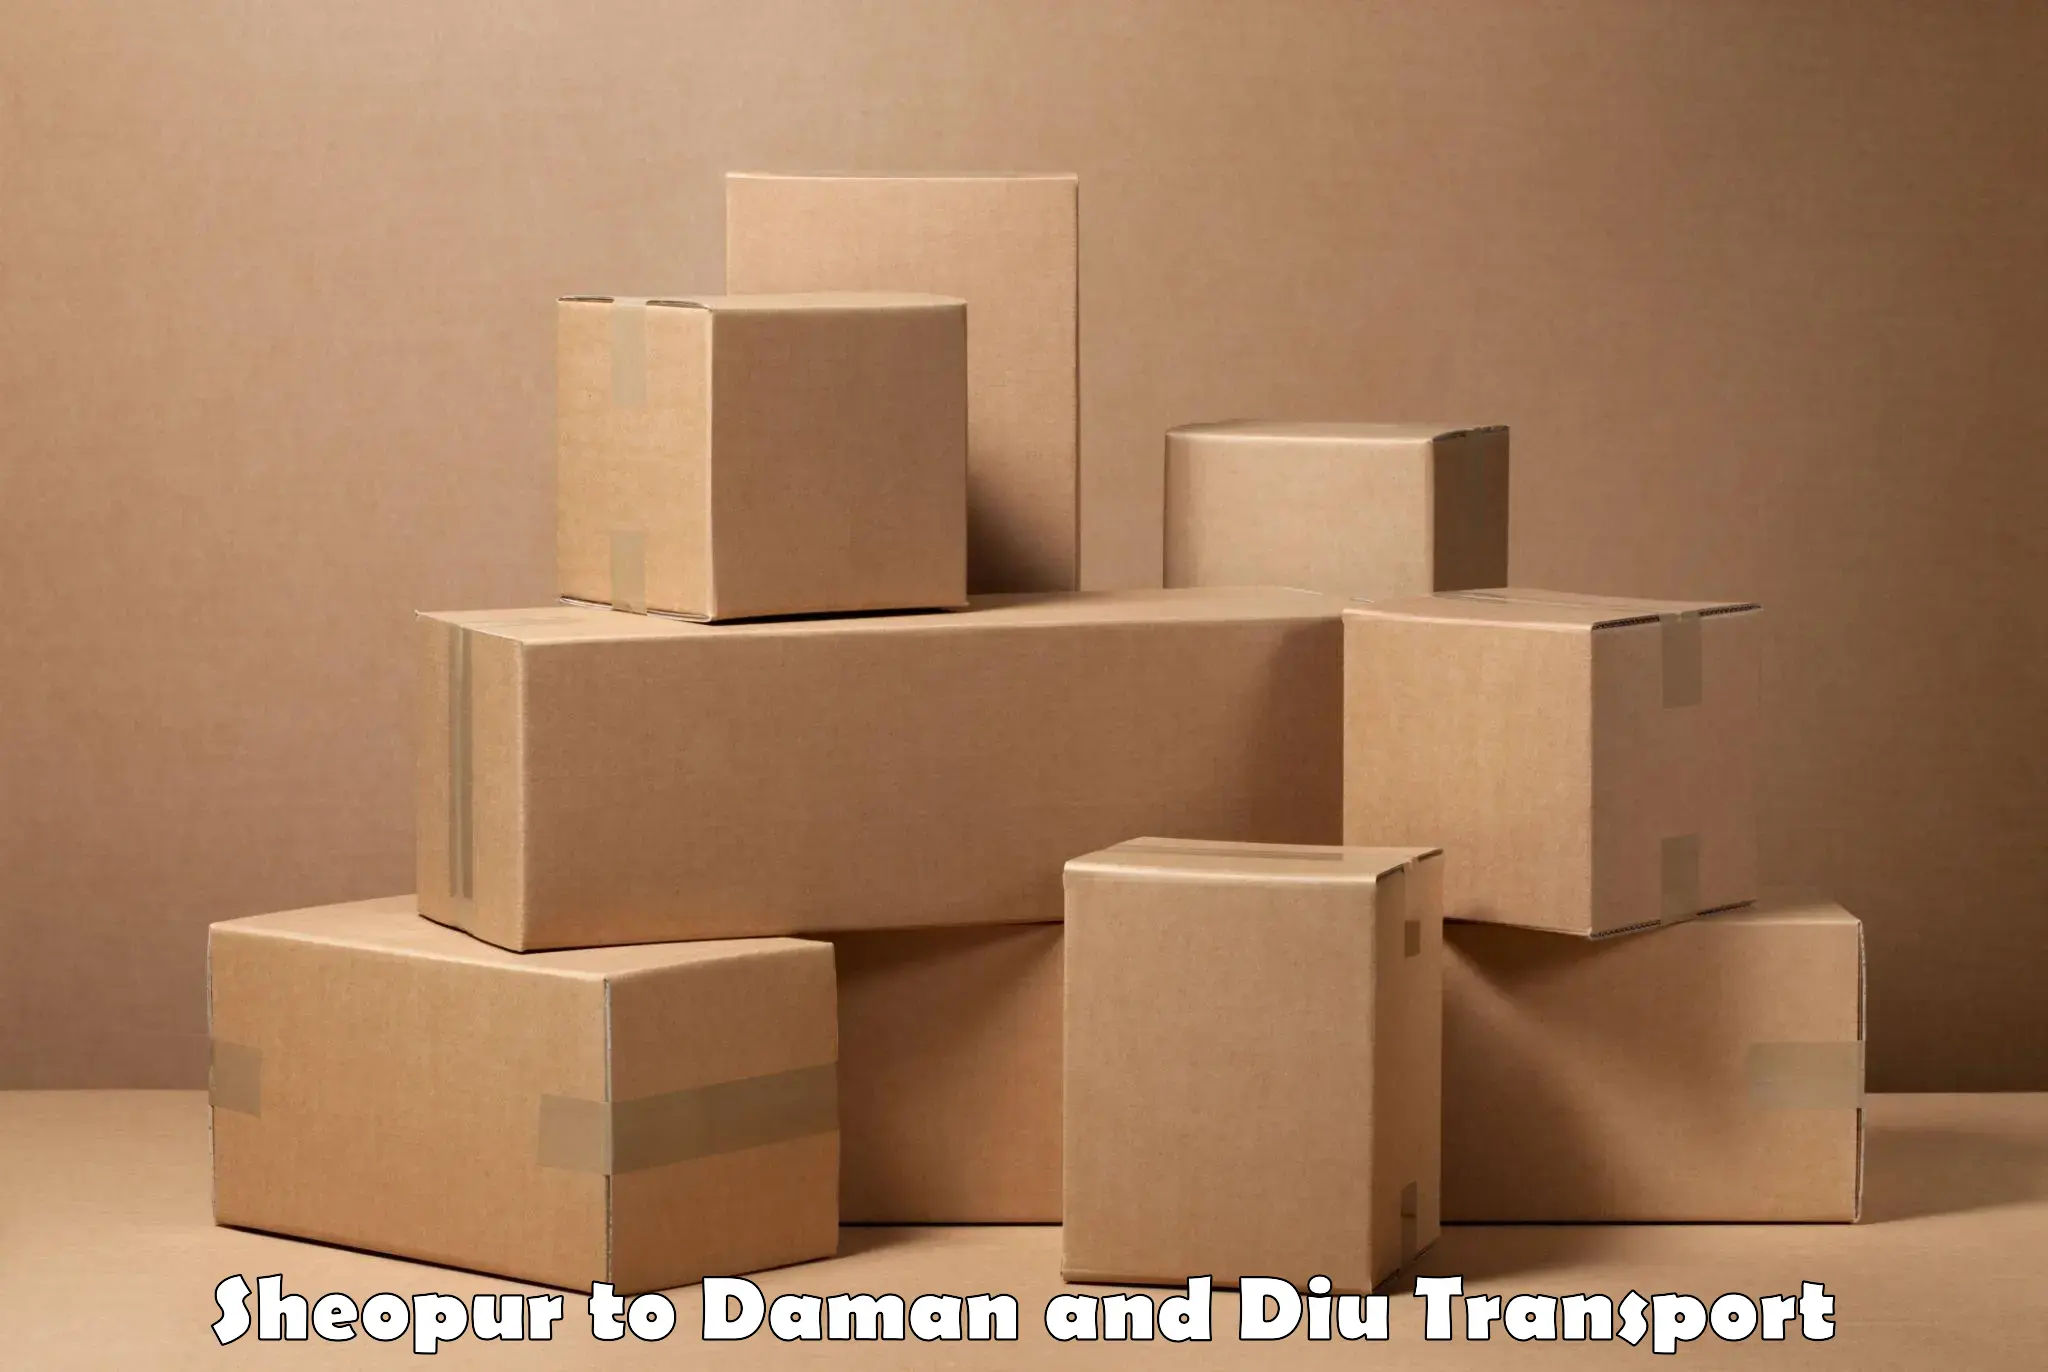 Container transport service Sheopur to Daman and Diu